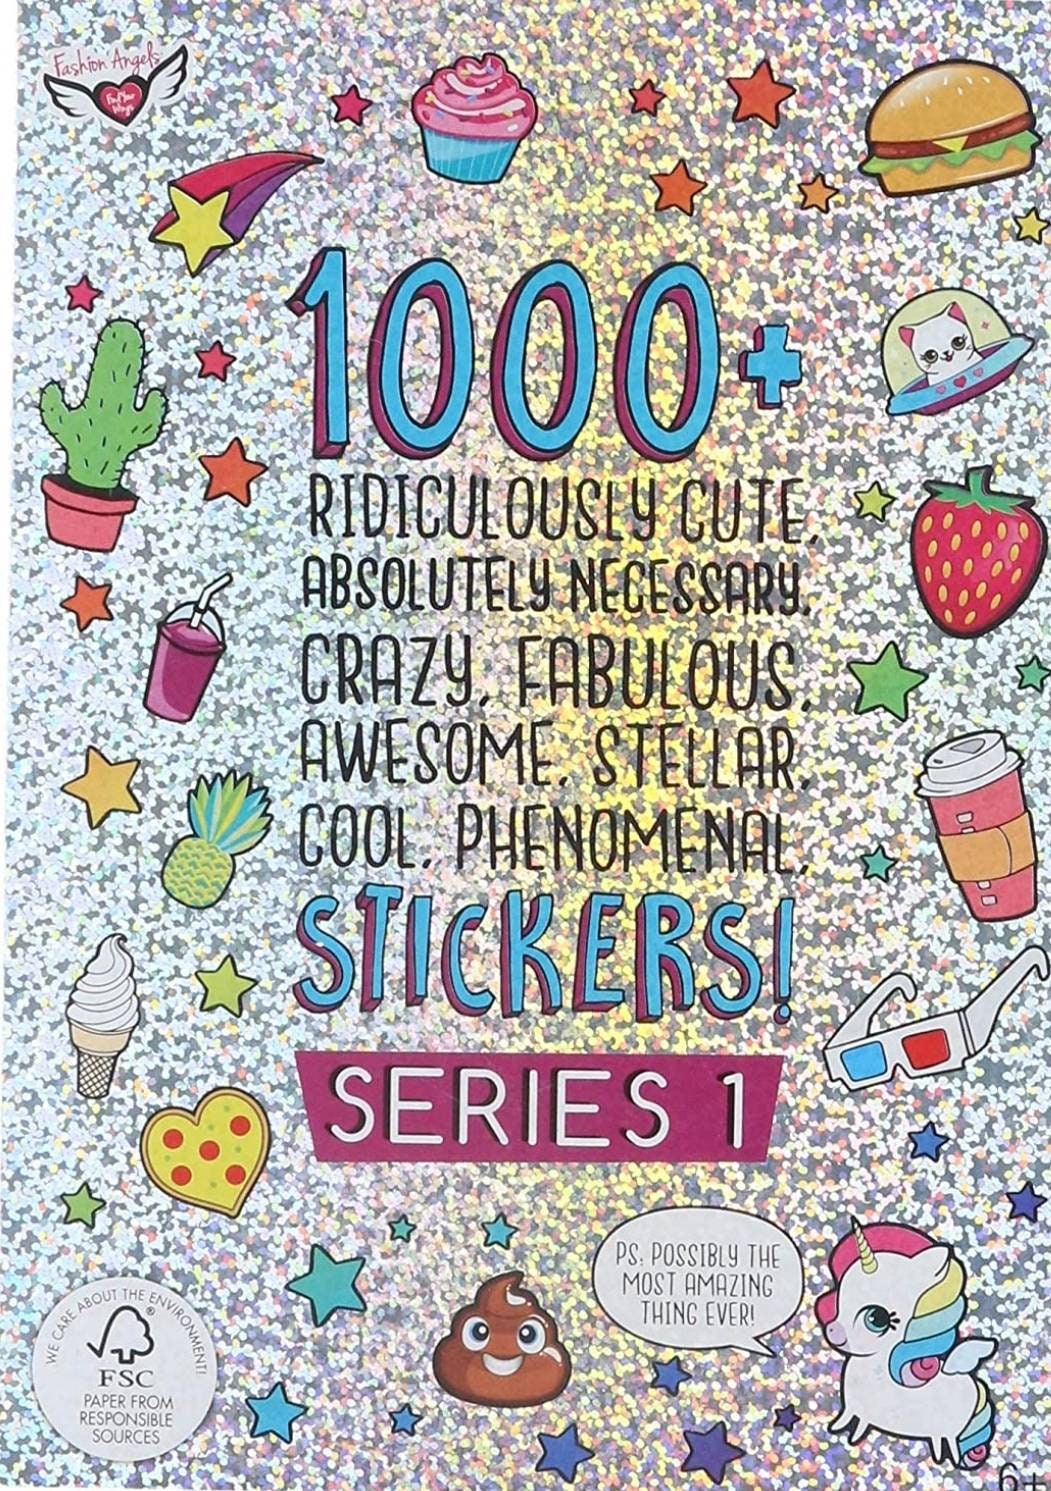 1000+ Ridiculously Cute Stickers - Board Game Barrister